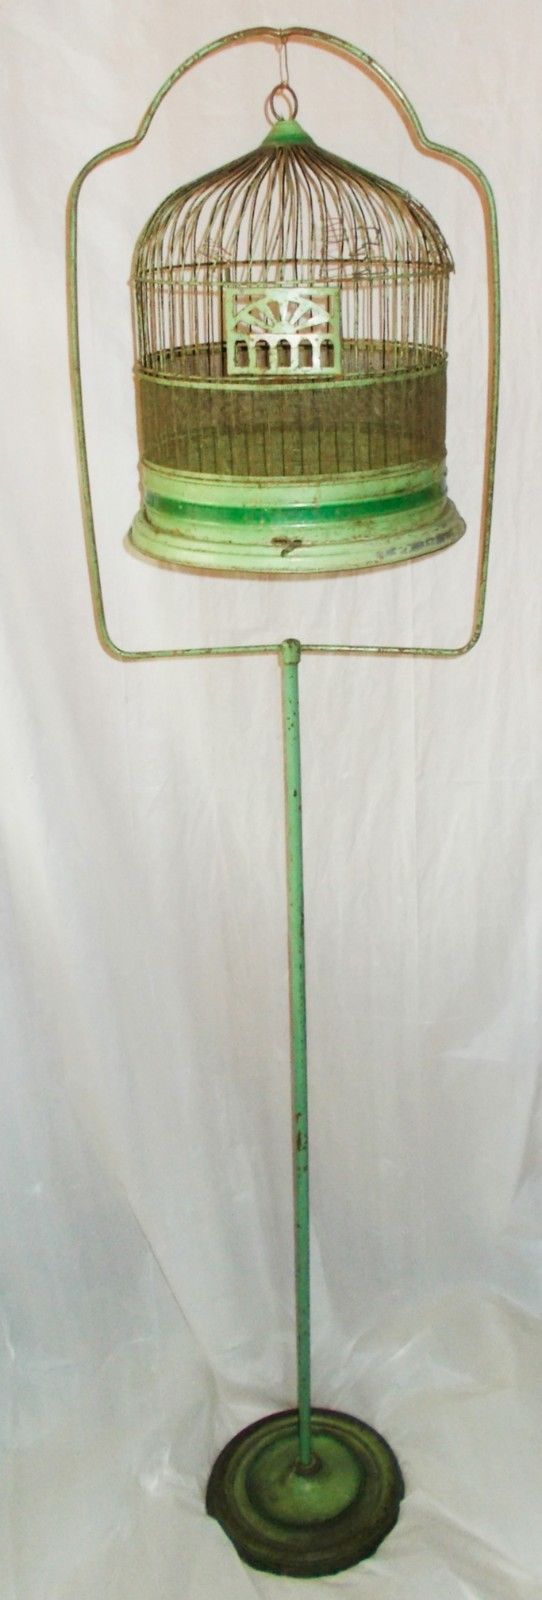 Vintage Green Metal Wire Bird Cage w Stand 65 Inches High Antique ?